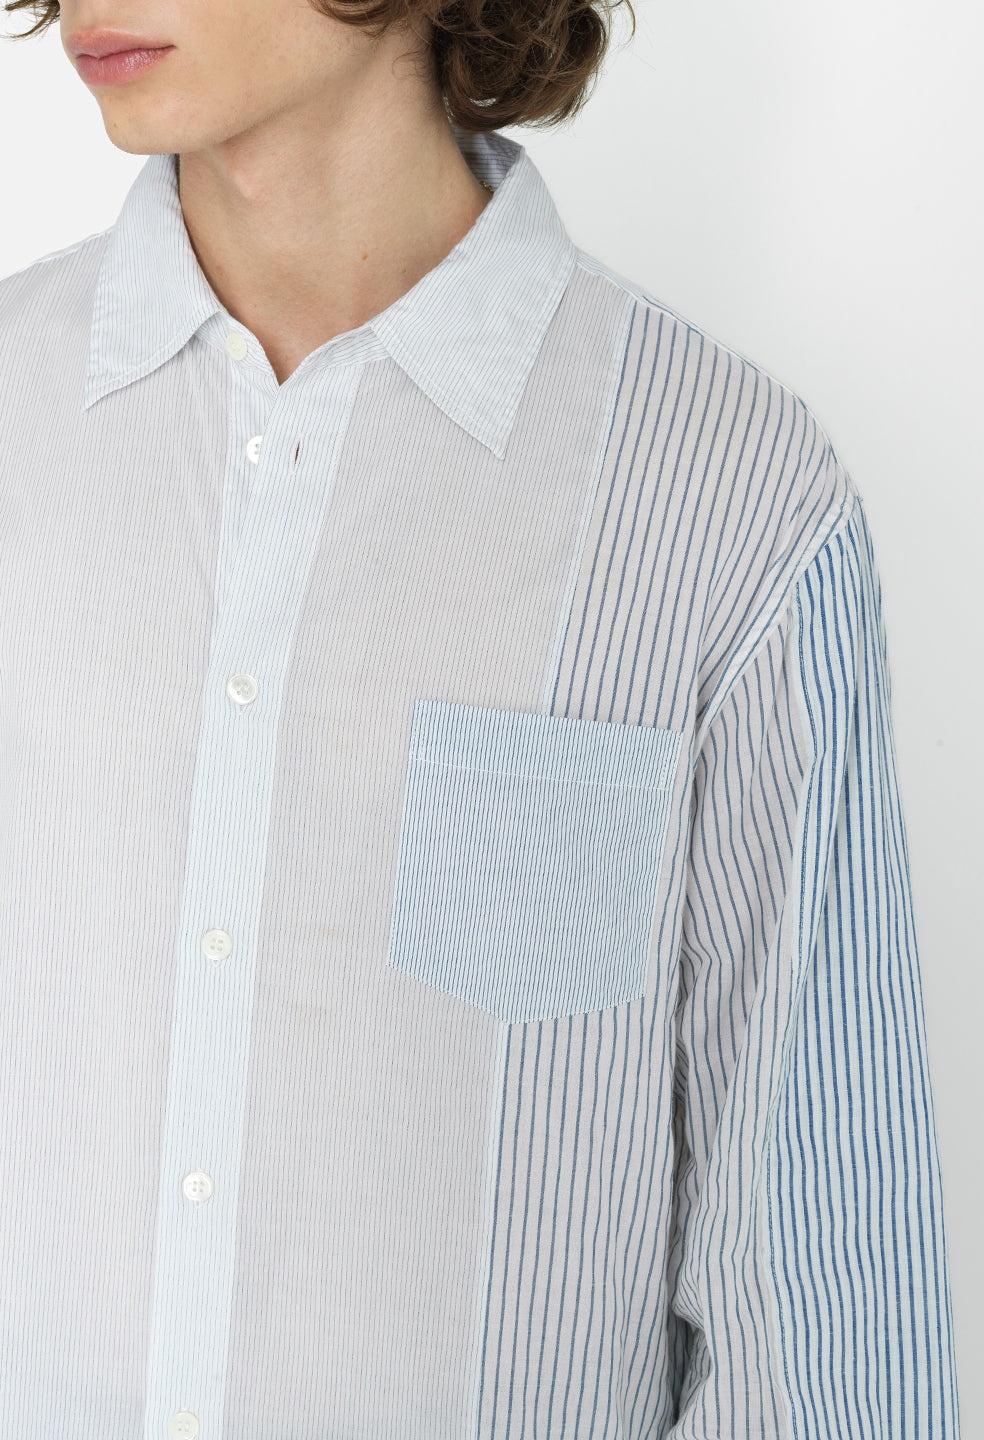 PANELED BUTTON UP - 7